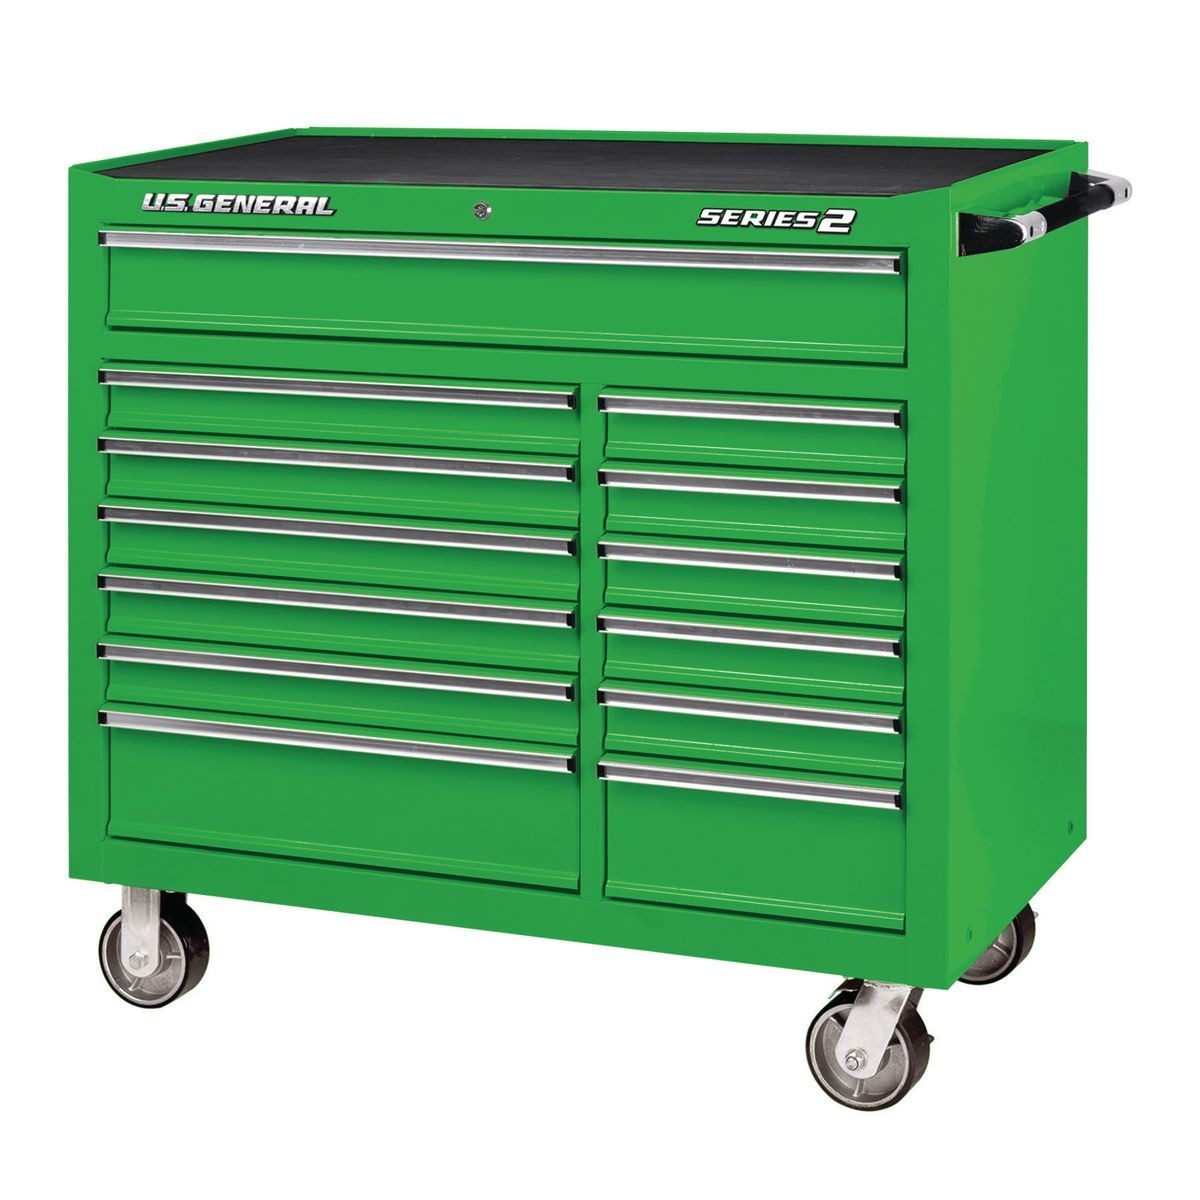 U.S. GENERAL 44 In. X 22 In. Double Bank Roller Cabinet – Green – Item 64954